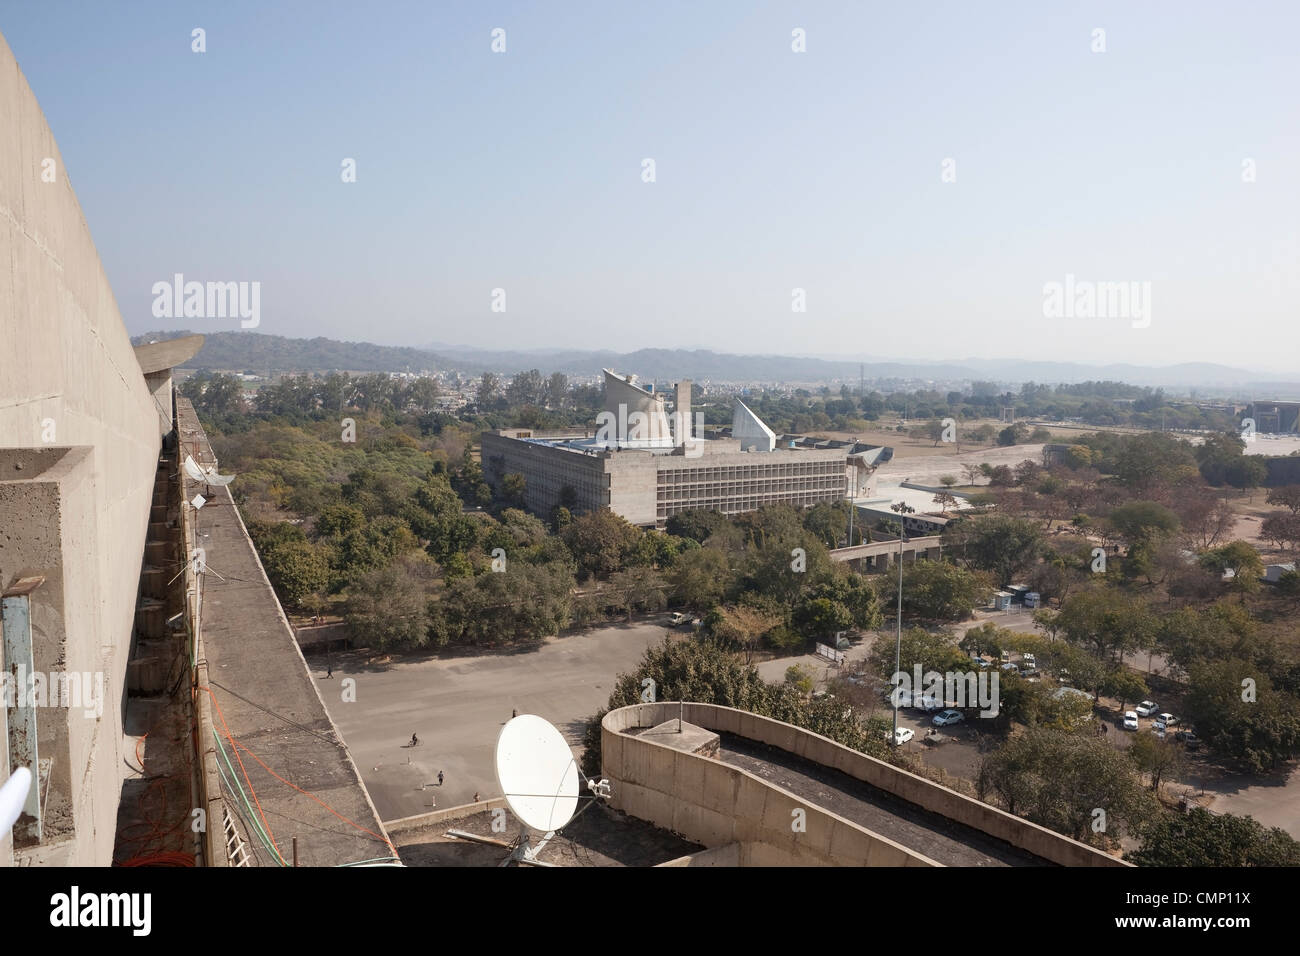 the Legislative Assembly building in the modern city of Chandigarh viewed from the rooftop of the Secretariat building Stock Photo